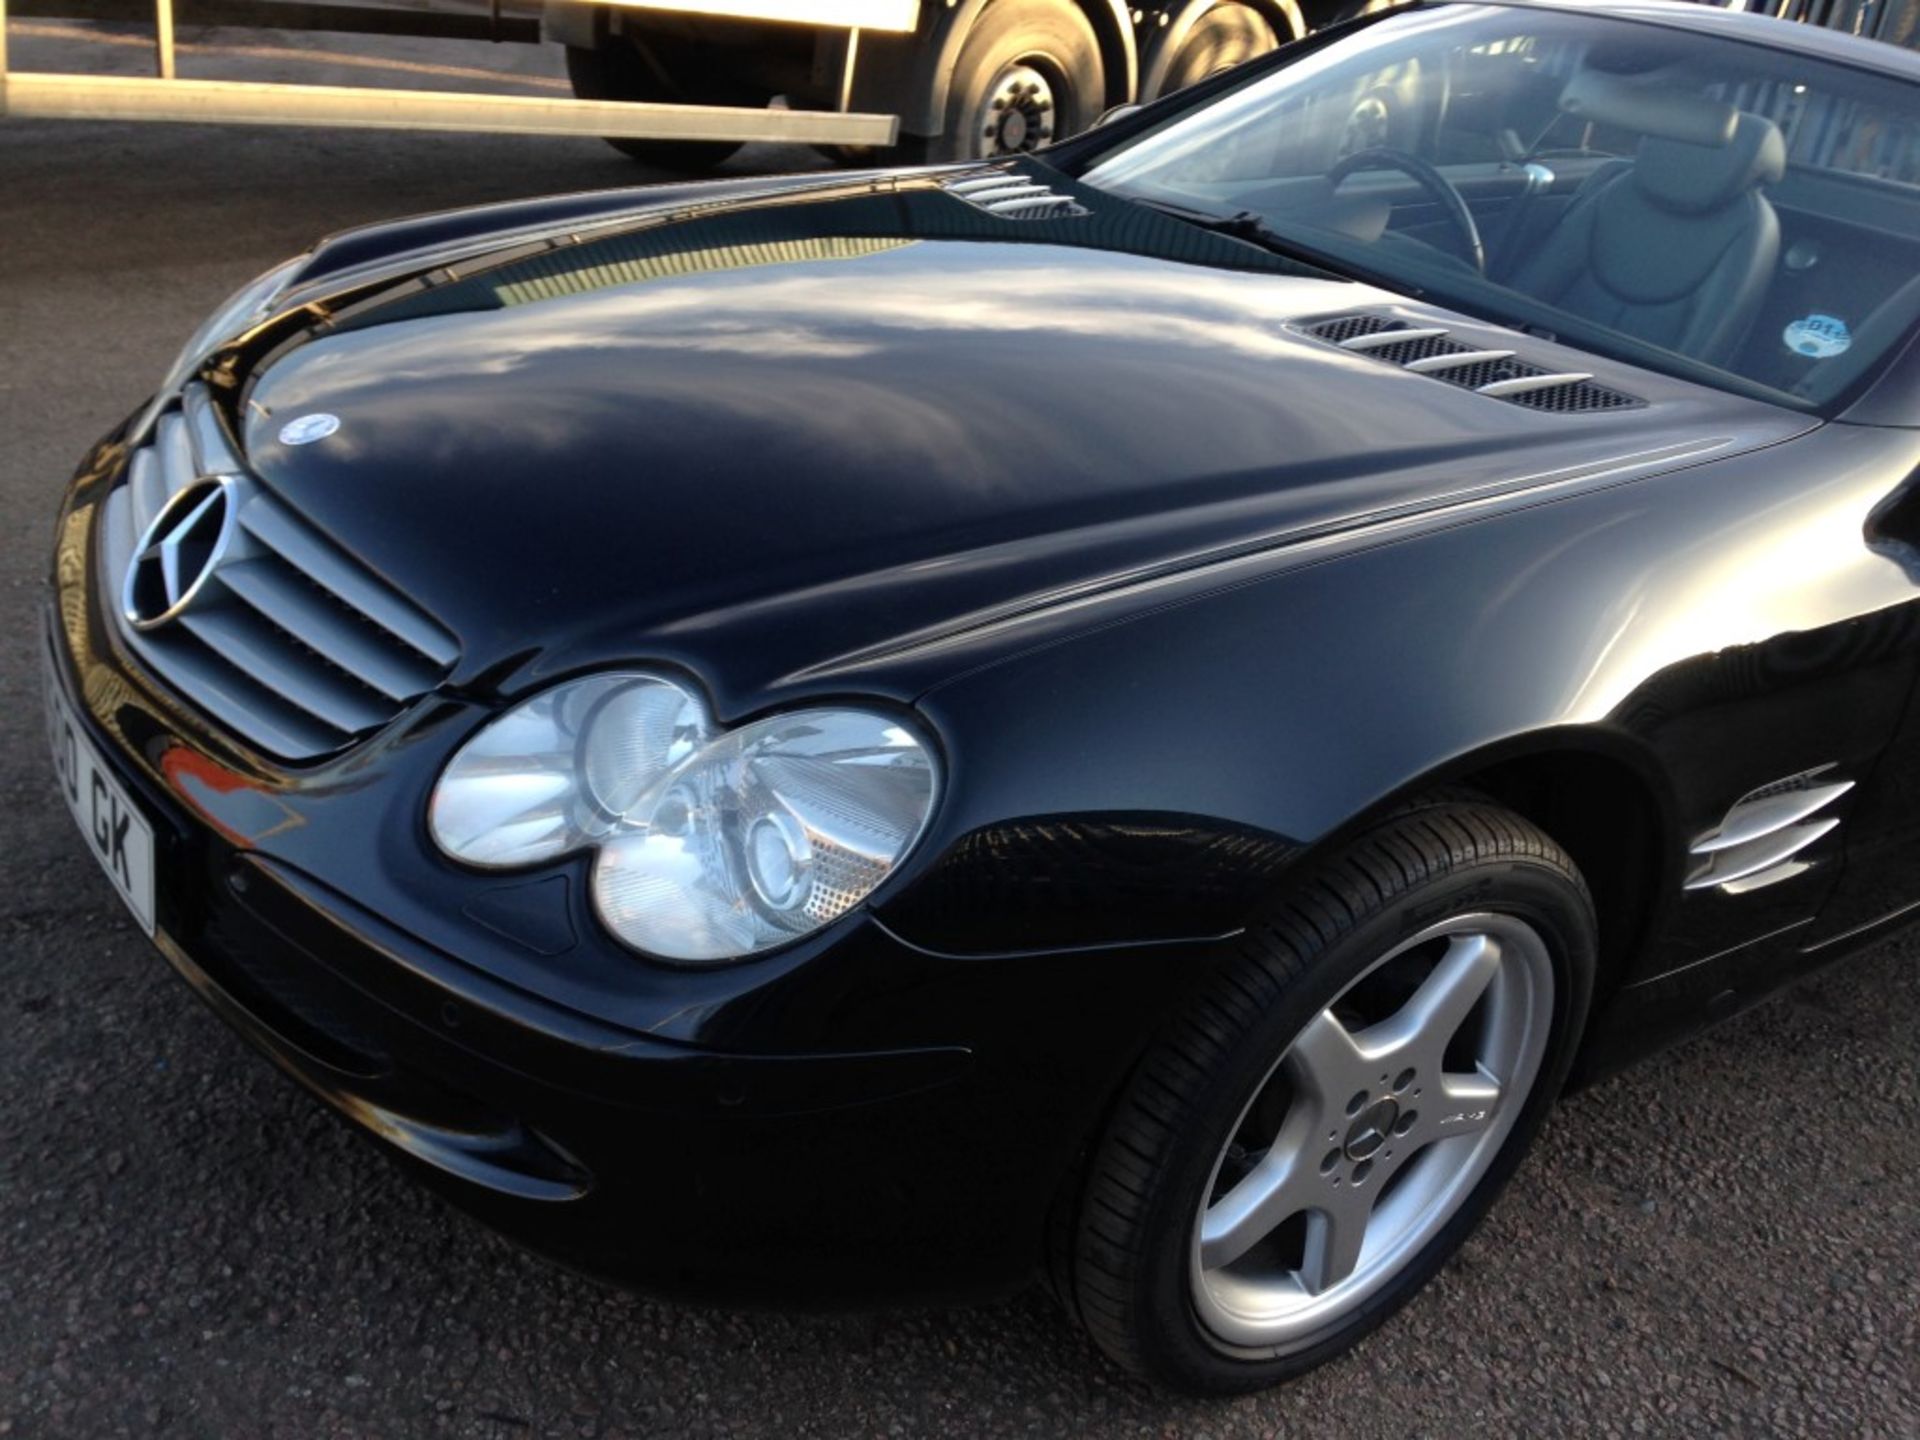 1 x Mercedes SL500 Automatic 5.0 Convertible - Petrol - Year 2002 - 94,500 Miles - Long MOT Expiry - Image 28 of 31